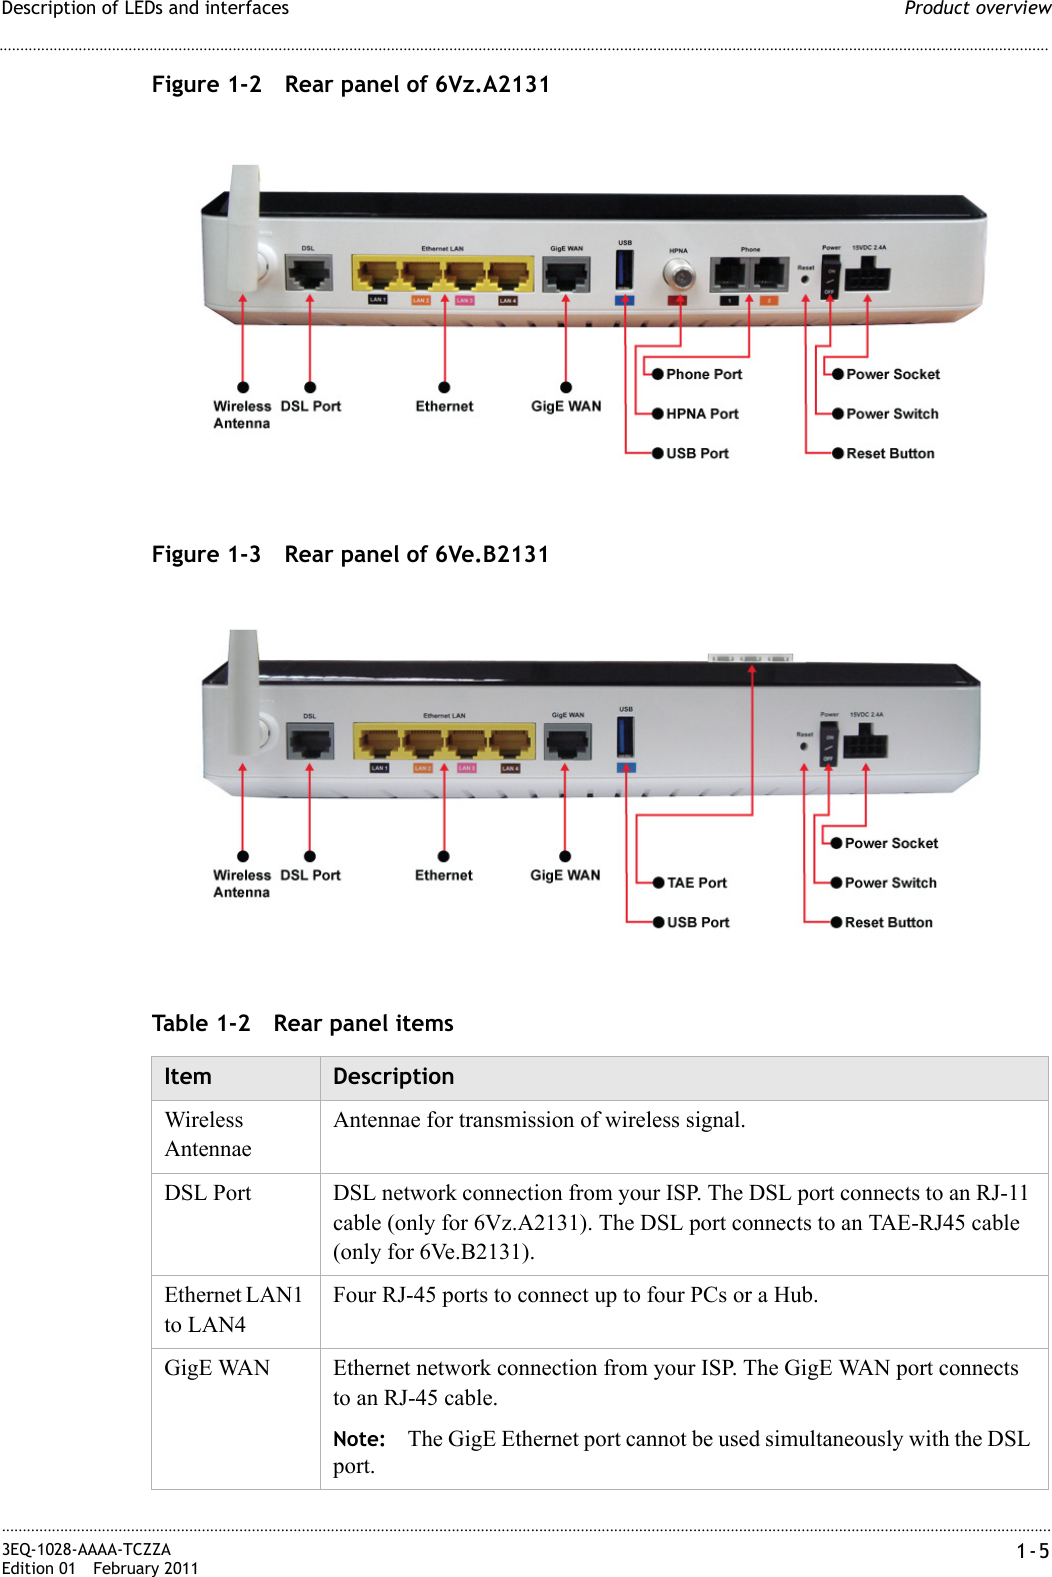 Product overviewDescription of LEDs and interfaces............................................................................................................................................................................................................................................................3EQ-1028-AAAA-TCZZAEdition 01 February 2011 1-5............................................................................................................................................................................................................................................................Figure 1-2 Rear panel of 6Vz.A2131Figure 1-3 Rear panel of 6Ve.B2131Table 1-2 Rear panel itemsItem DescriptionWireless AntennaeAntennae for transmission of wireless signal.DSL Port DSL network connection from your ISP. The DSL port connects to an RJ-11 cable (only for 6Vz.A2131). The DSL port connects to an TAE-RJ45 cable (only for 6Ve.B2131).Ethernet LAN1 to LAN4Four RJ-45 ports to connect up to four PCs or a Hub.GigE WAN Ethernet network connection from your ISP. The GigE WAN port connects to an RJ-45 cable.Note: The GigE Ethernet port cannot be used simultaneously with the DSL port.